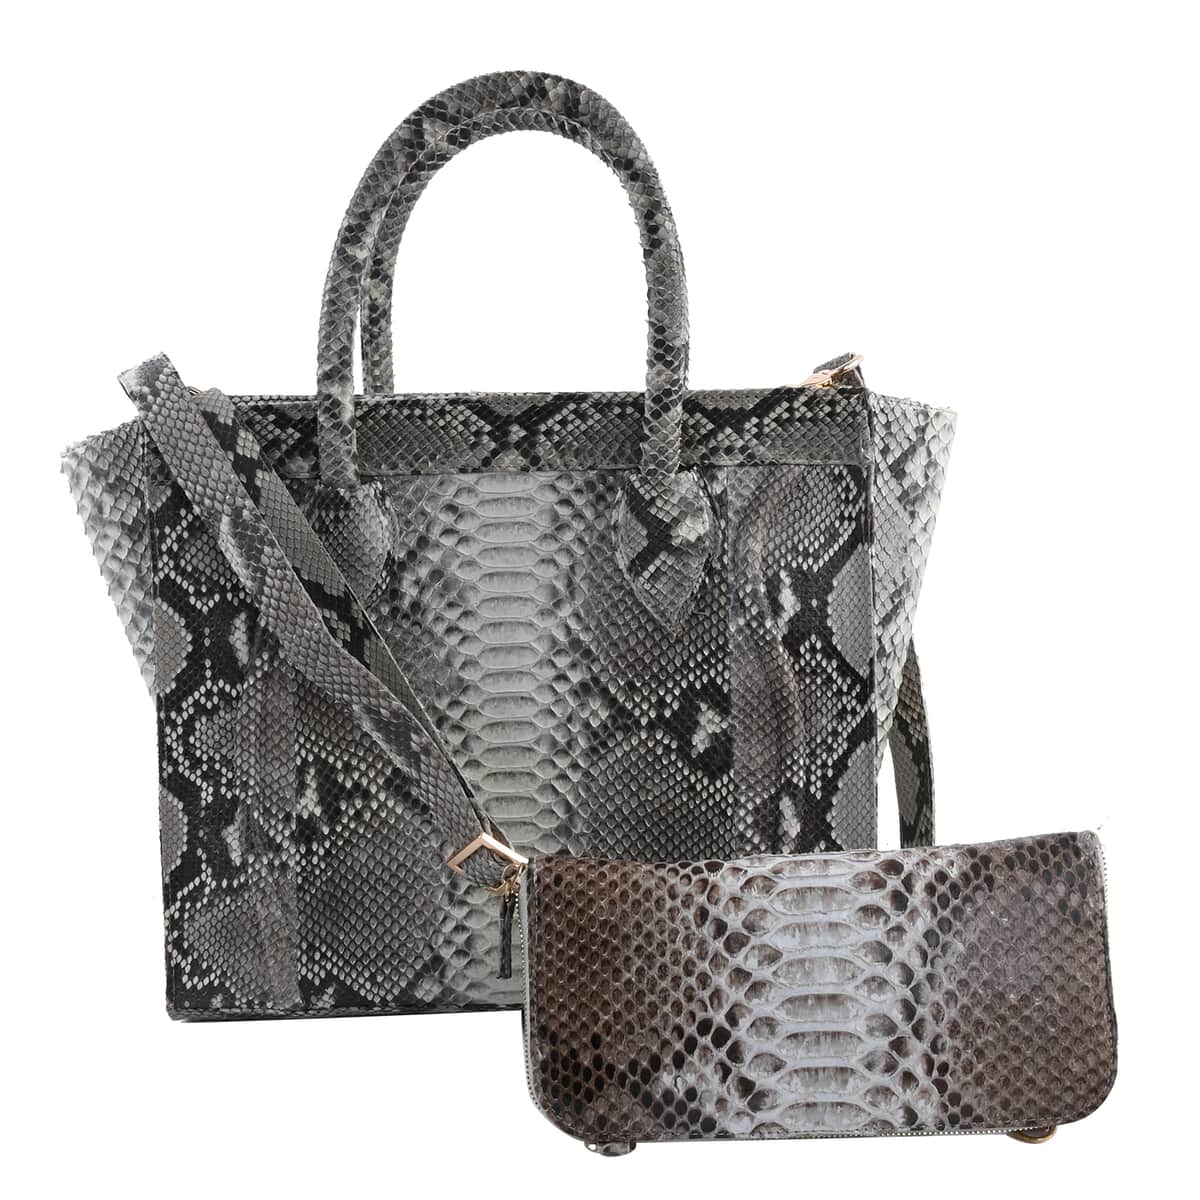 The Grand Pelle Handcrafted Natural Color Genuine Python Leather Tote Bag for Women with Wallet, Designer Tote Bags, Ladies Purse, Shoulder Handbags, Leather Wallet image number 0